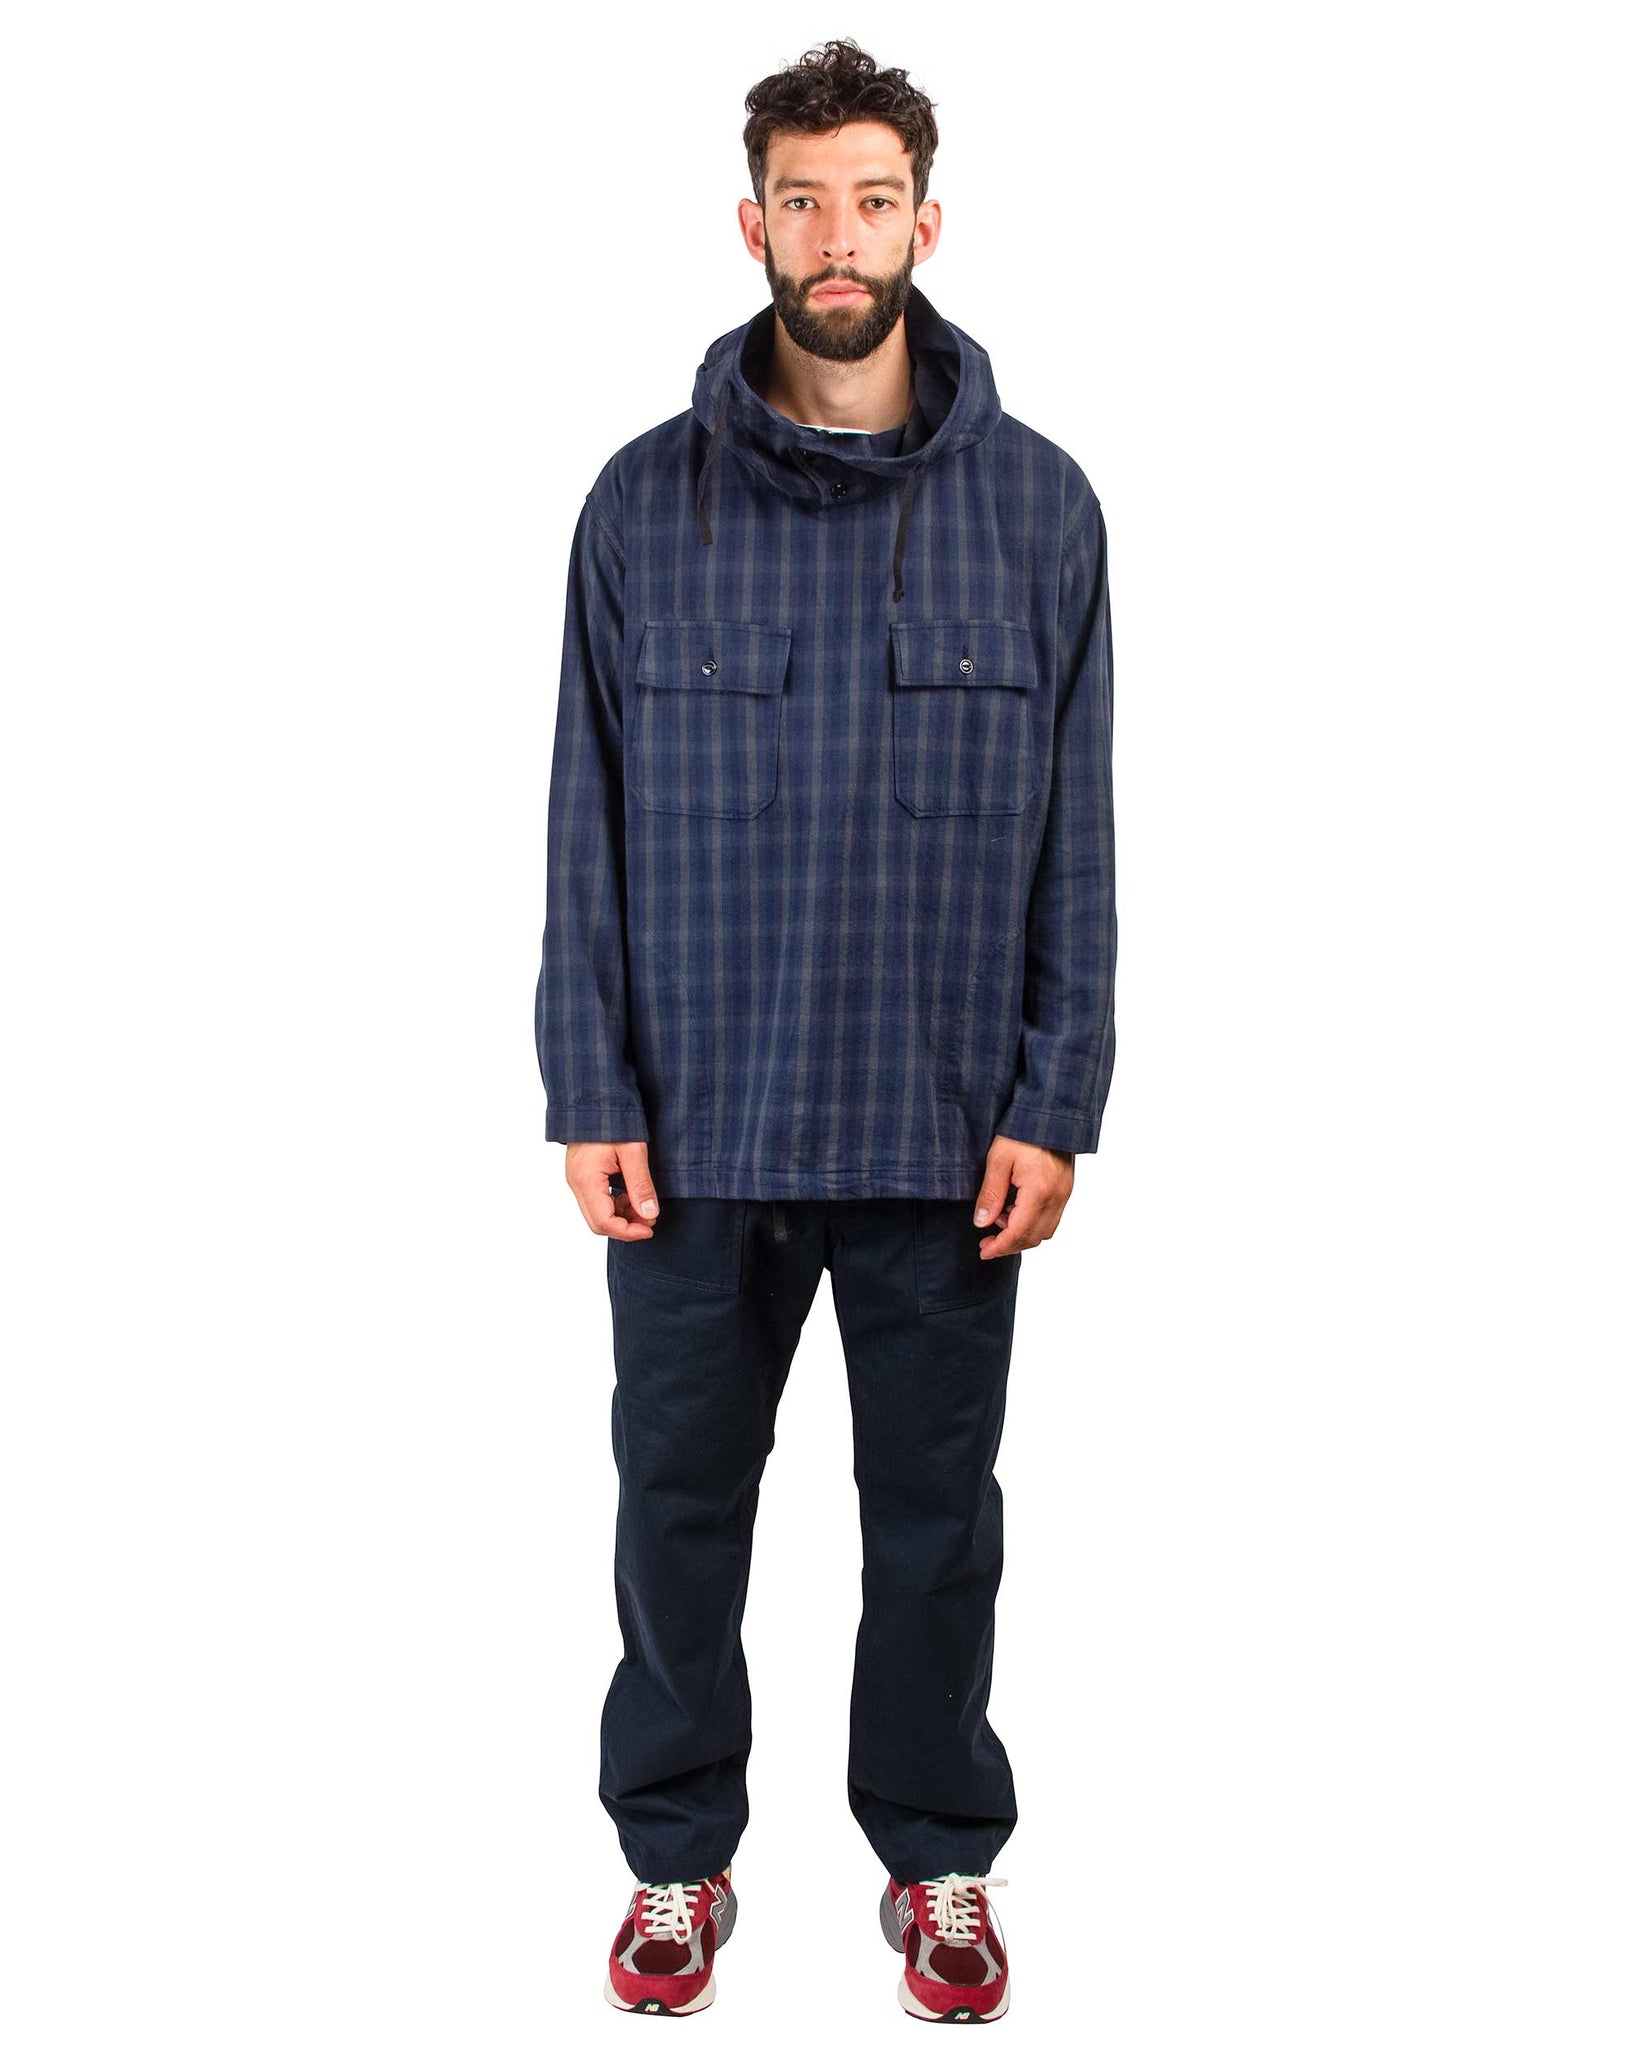 Engineered Garments Cagoule Shirt 22sssouth2west8